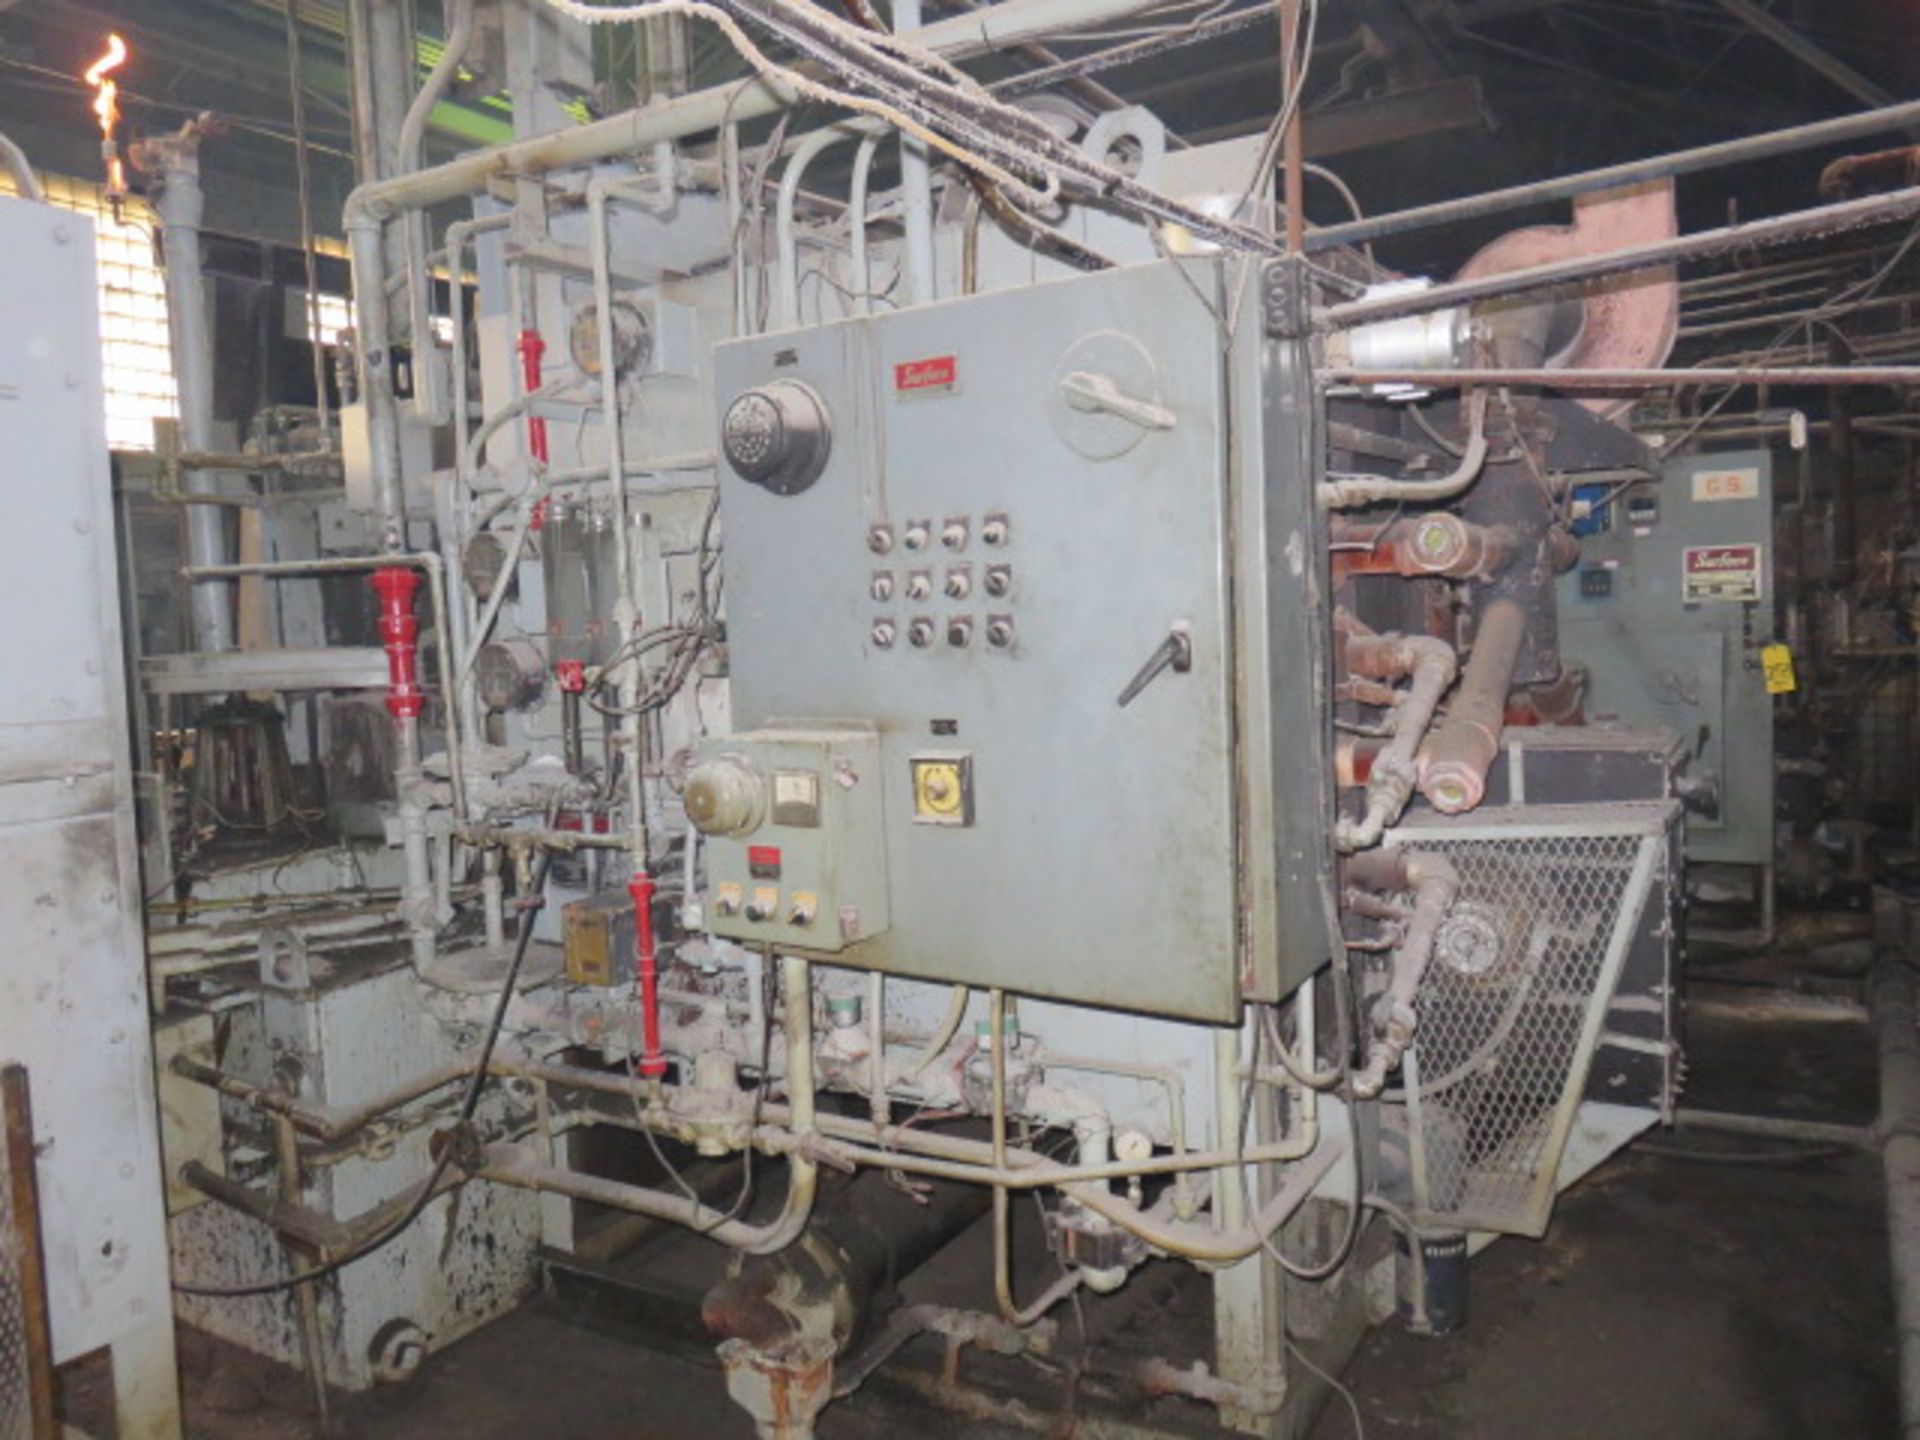 SURFACE COMBUSTION Power Convection AllCase Controlled Atmosphere Furnace, S/N BC-37855-1,... - Image 6 of 8